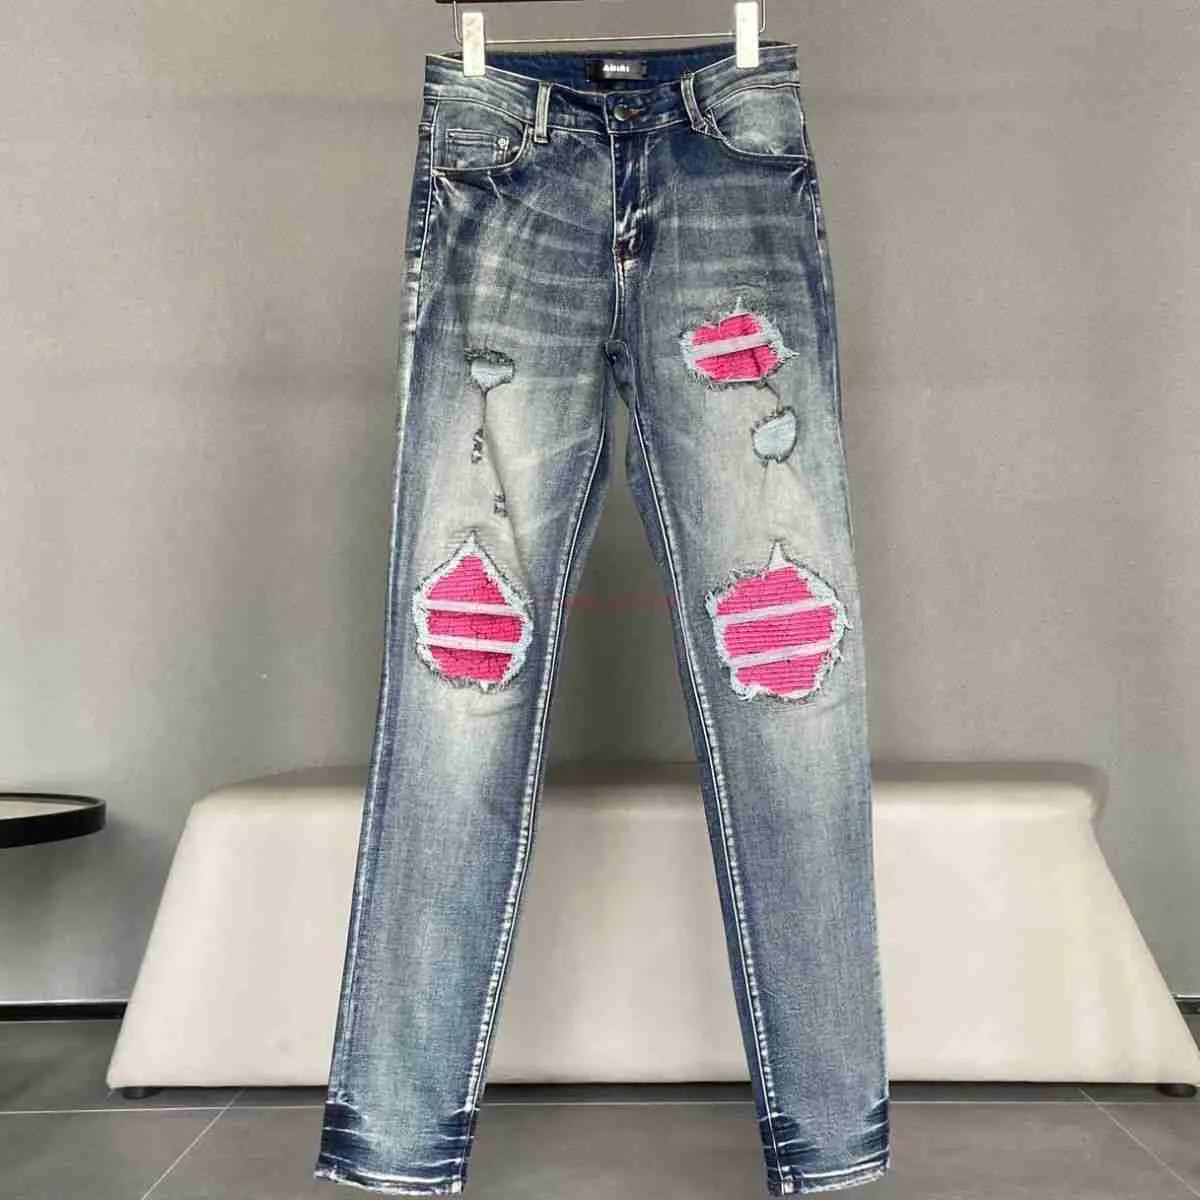 Designer Clothing Amires Jeans Denim Pants Fashion Brand Amies Red Pleated Patch Holes Old Jeans Mens Stretch Slim Ins Leg Pants Distressed Ripped Skinny Motocycle B